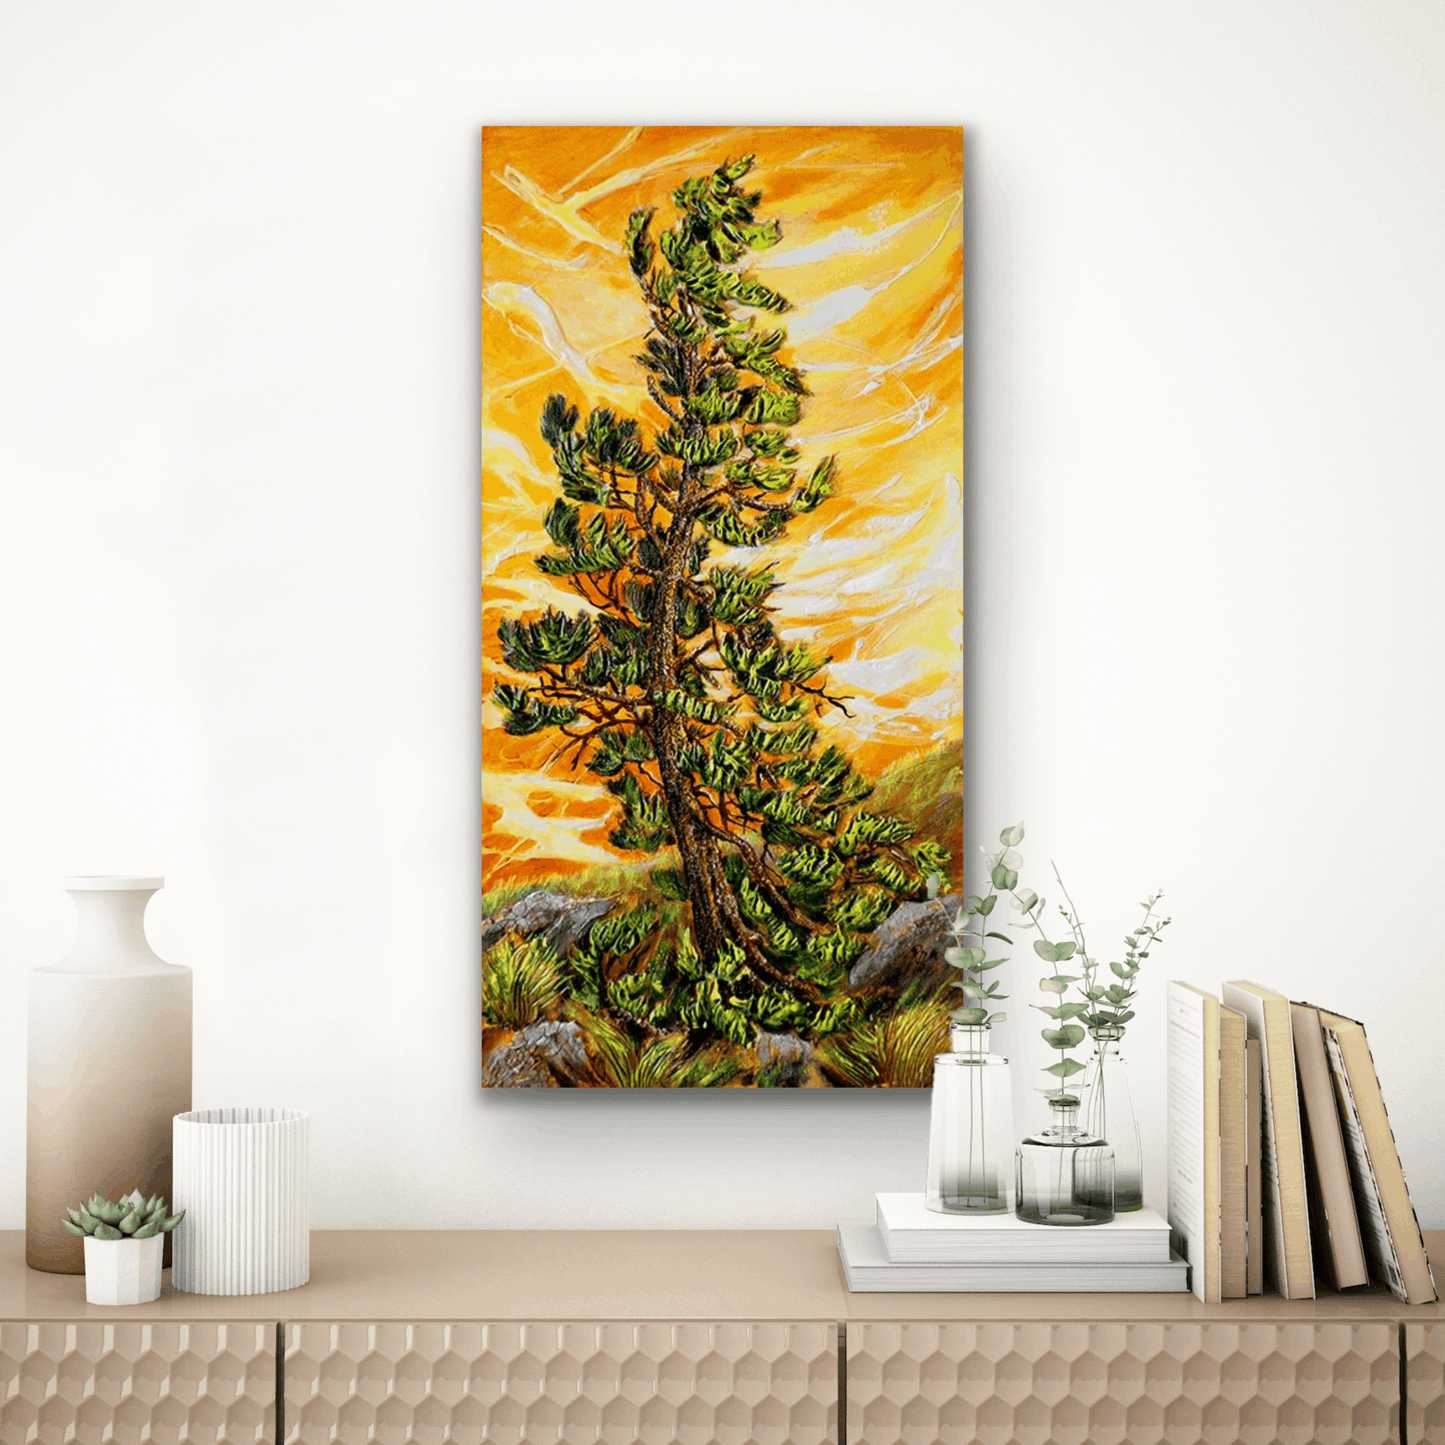 "Summer Pine" artwork was created by Ramona Hoeft.